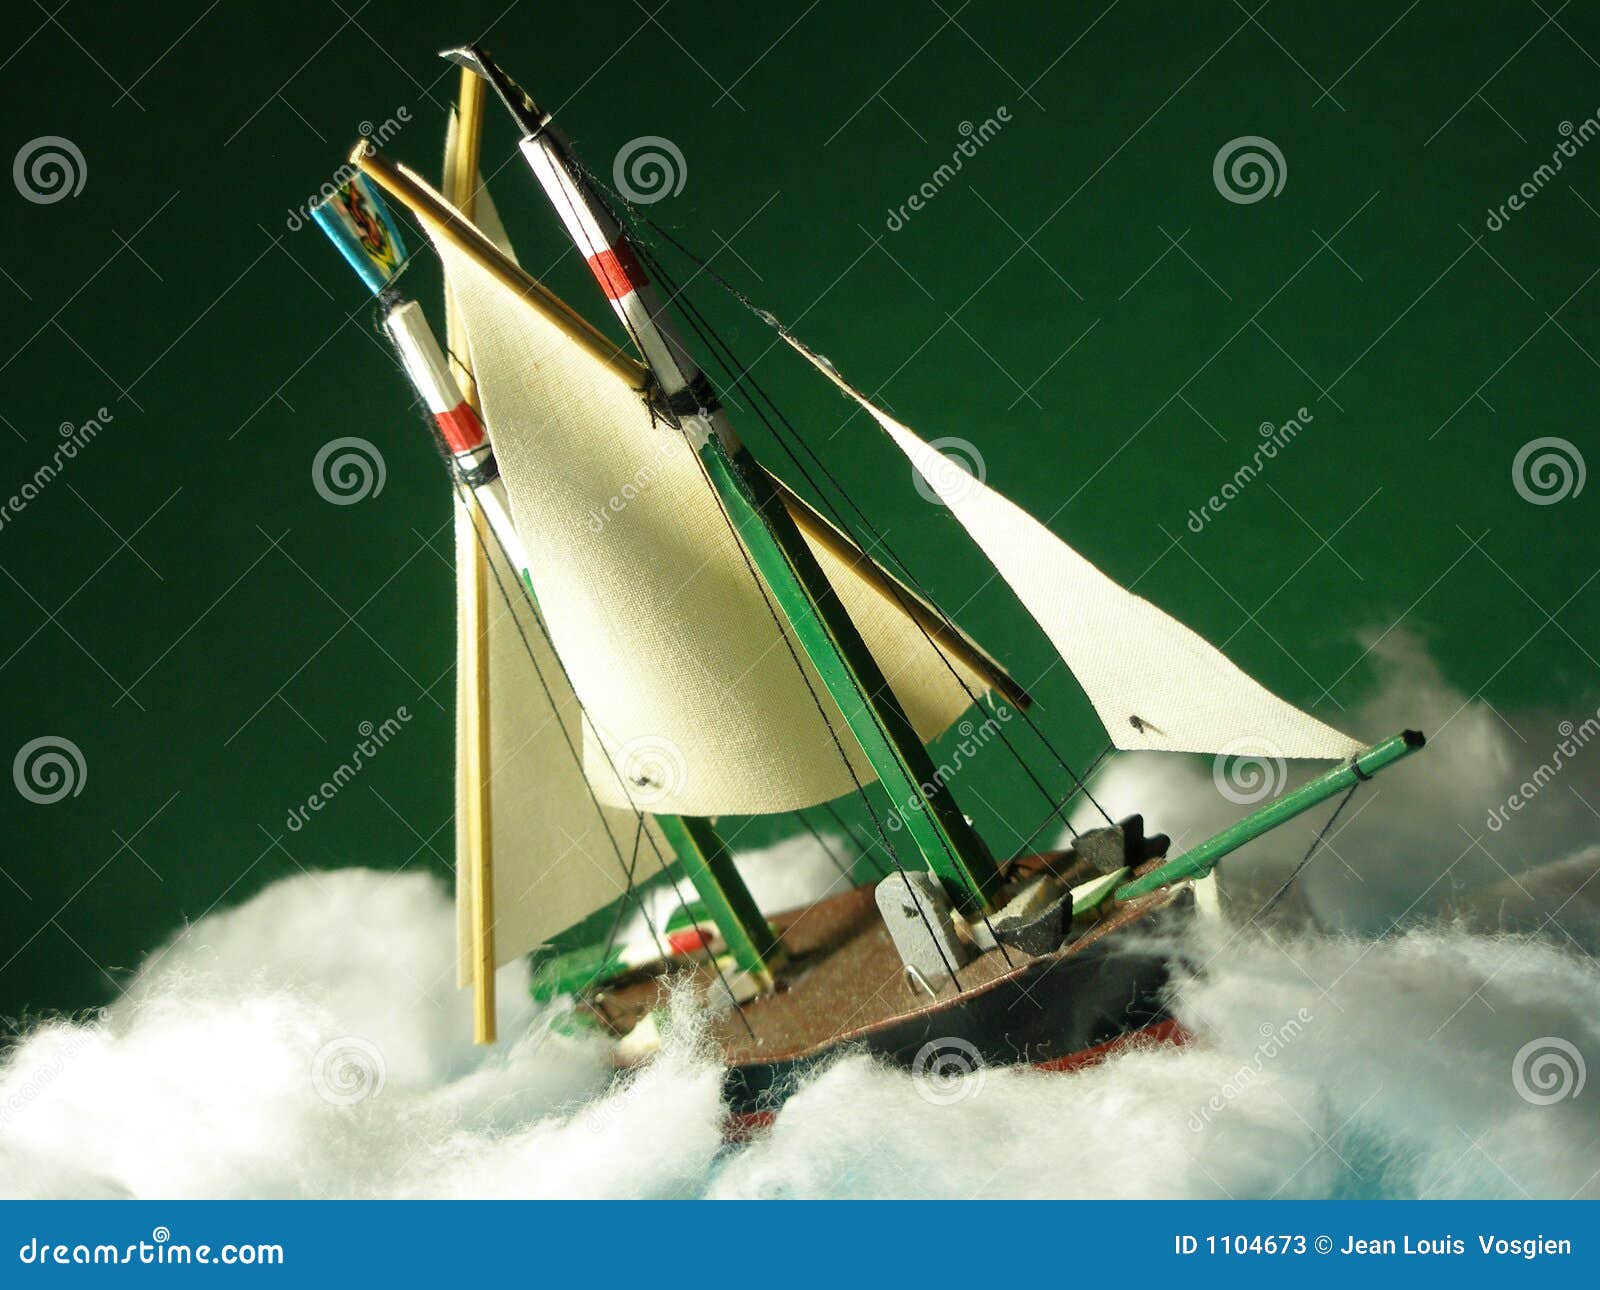 Model Boat Suffering Bad Weather Stock Photos - Image: 1104673